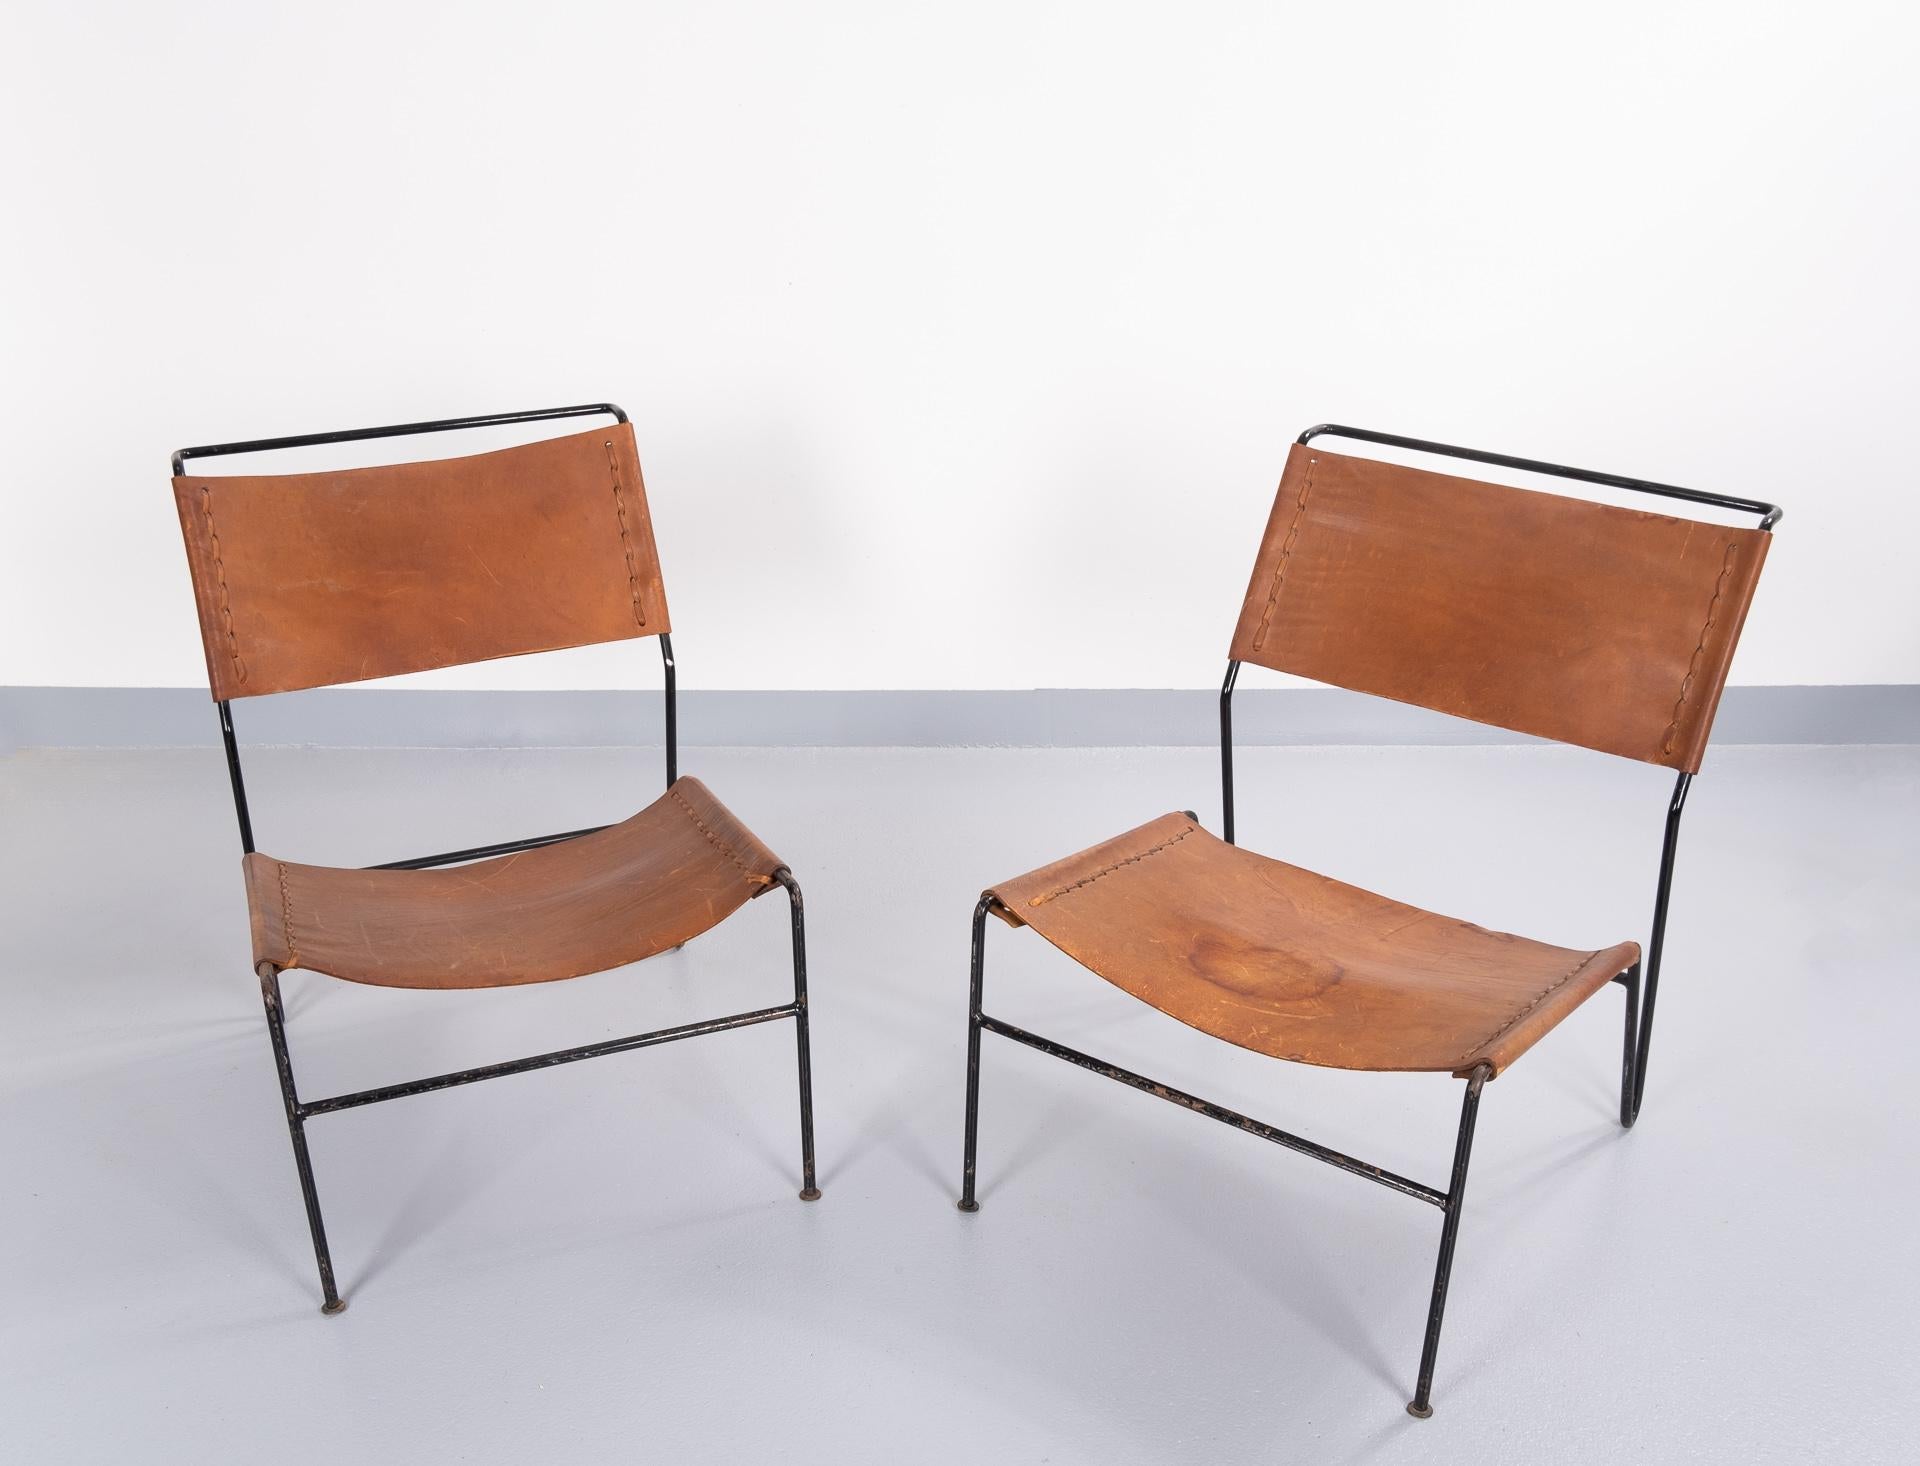 Mid-Century Modern Saddle Leather Lounge Chairs 1960s Dutch A Dolleman for Metz & Co